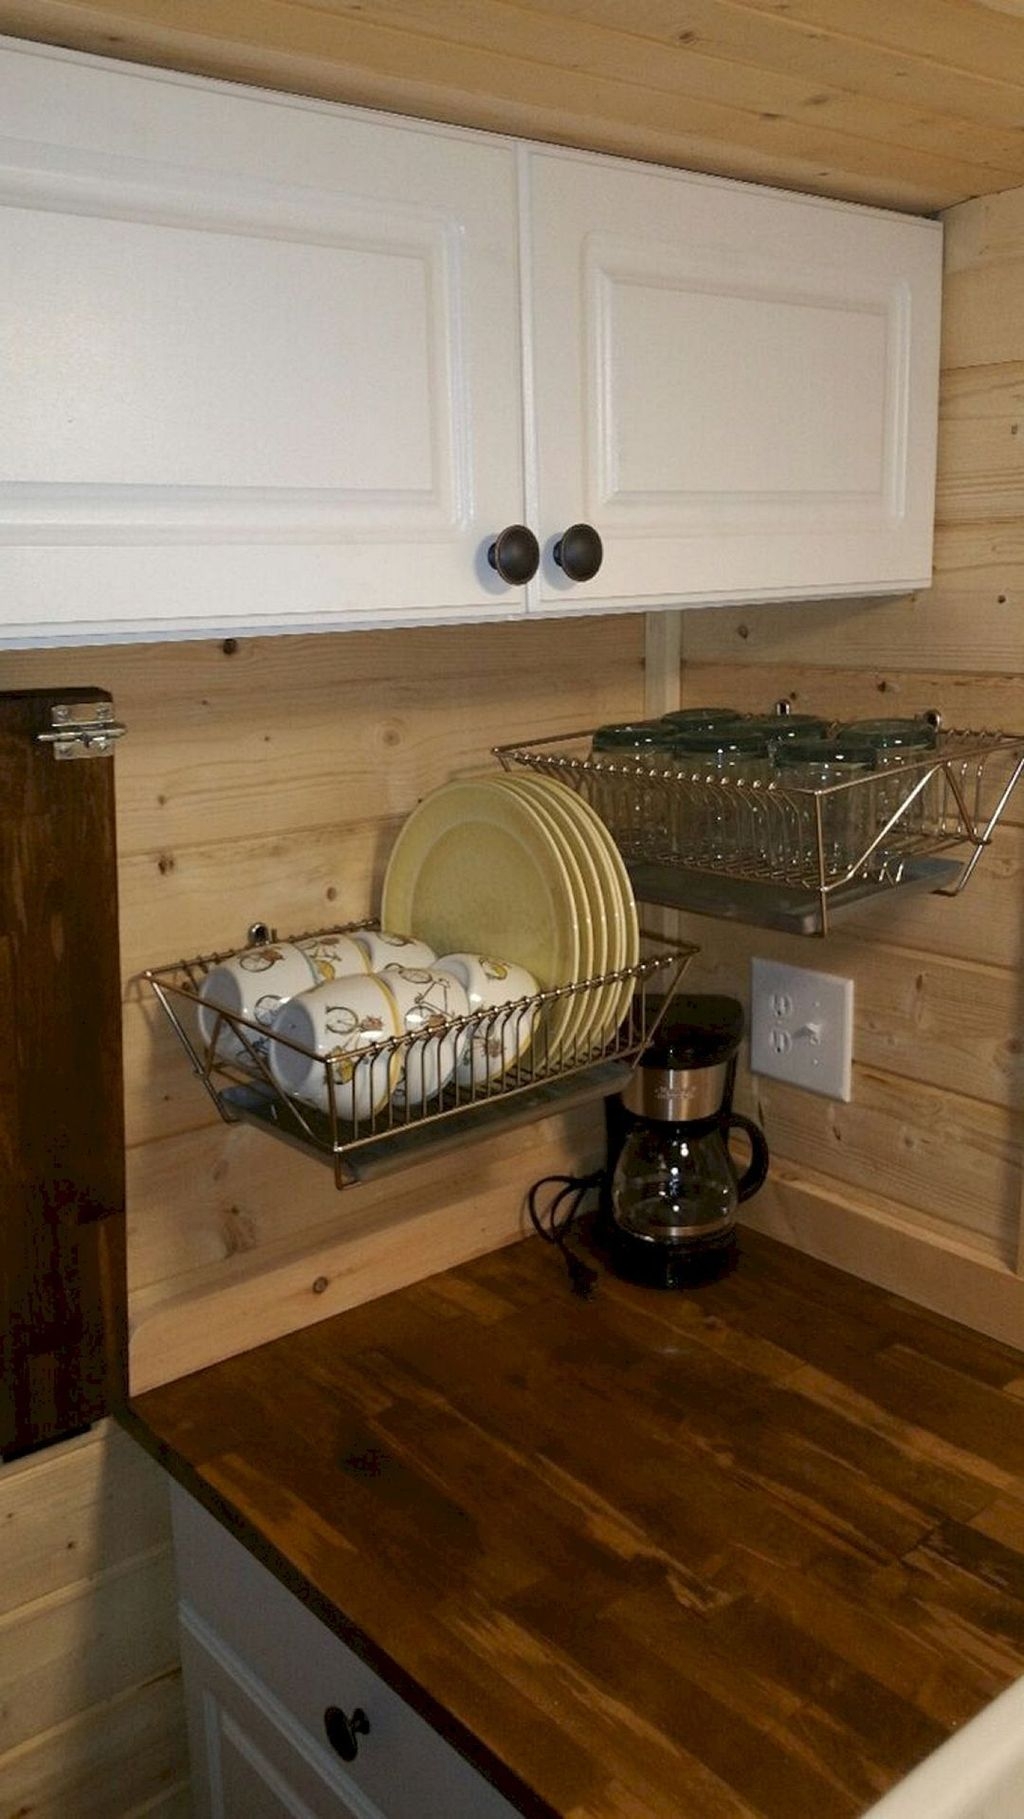 Best RV Kitchen Storage Ideas For Cozy Cook When The Camping 30